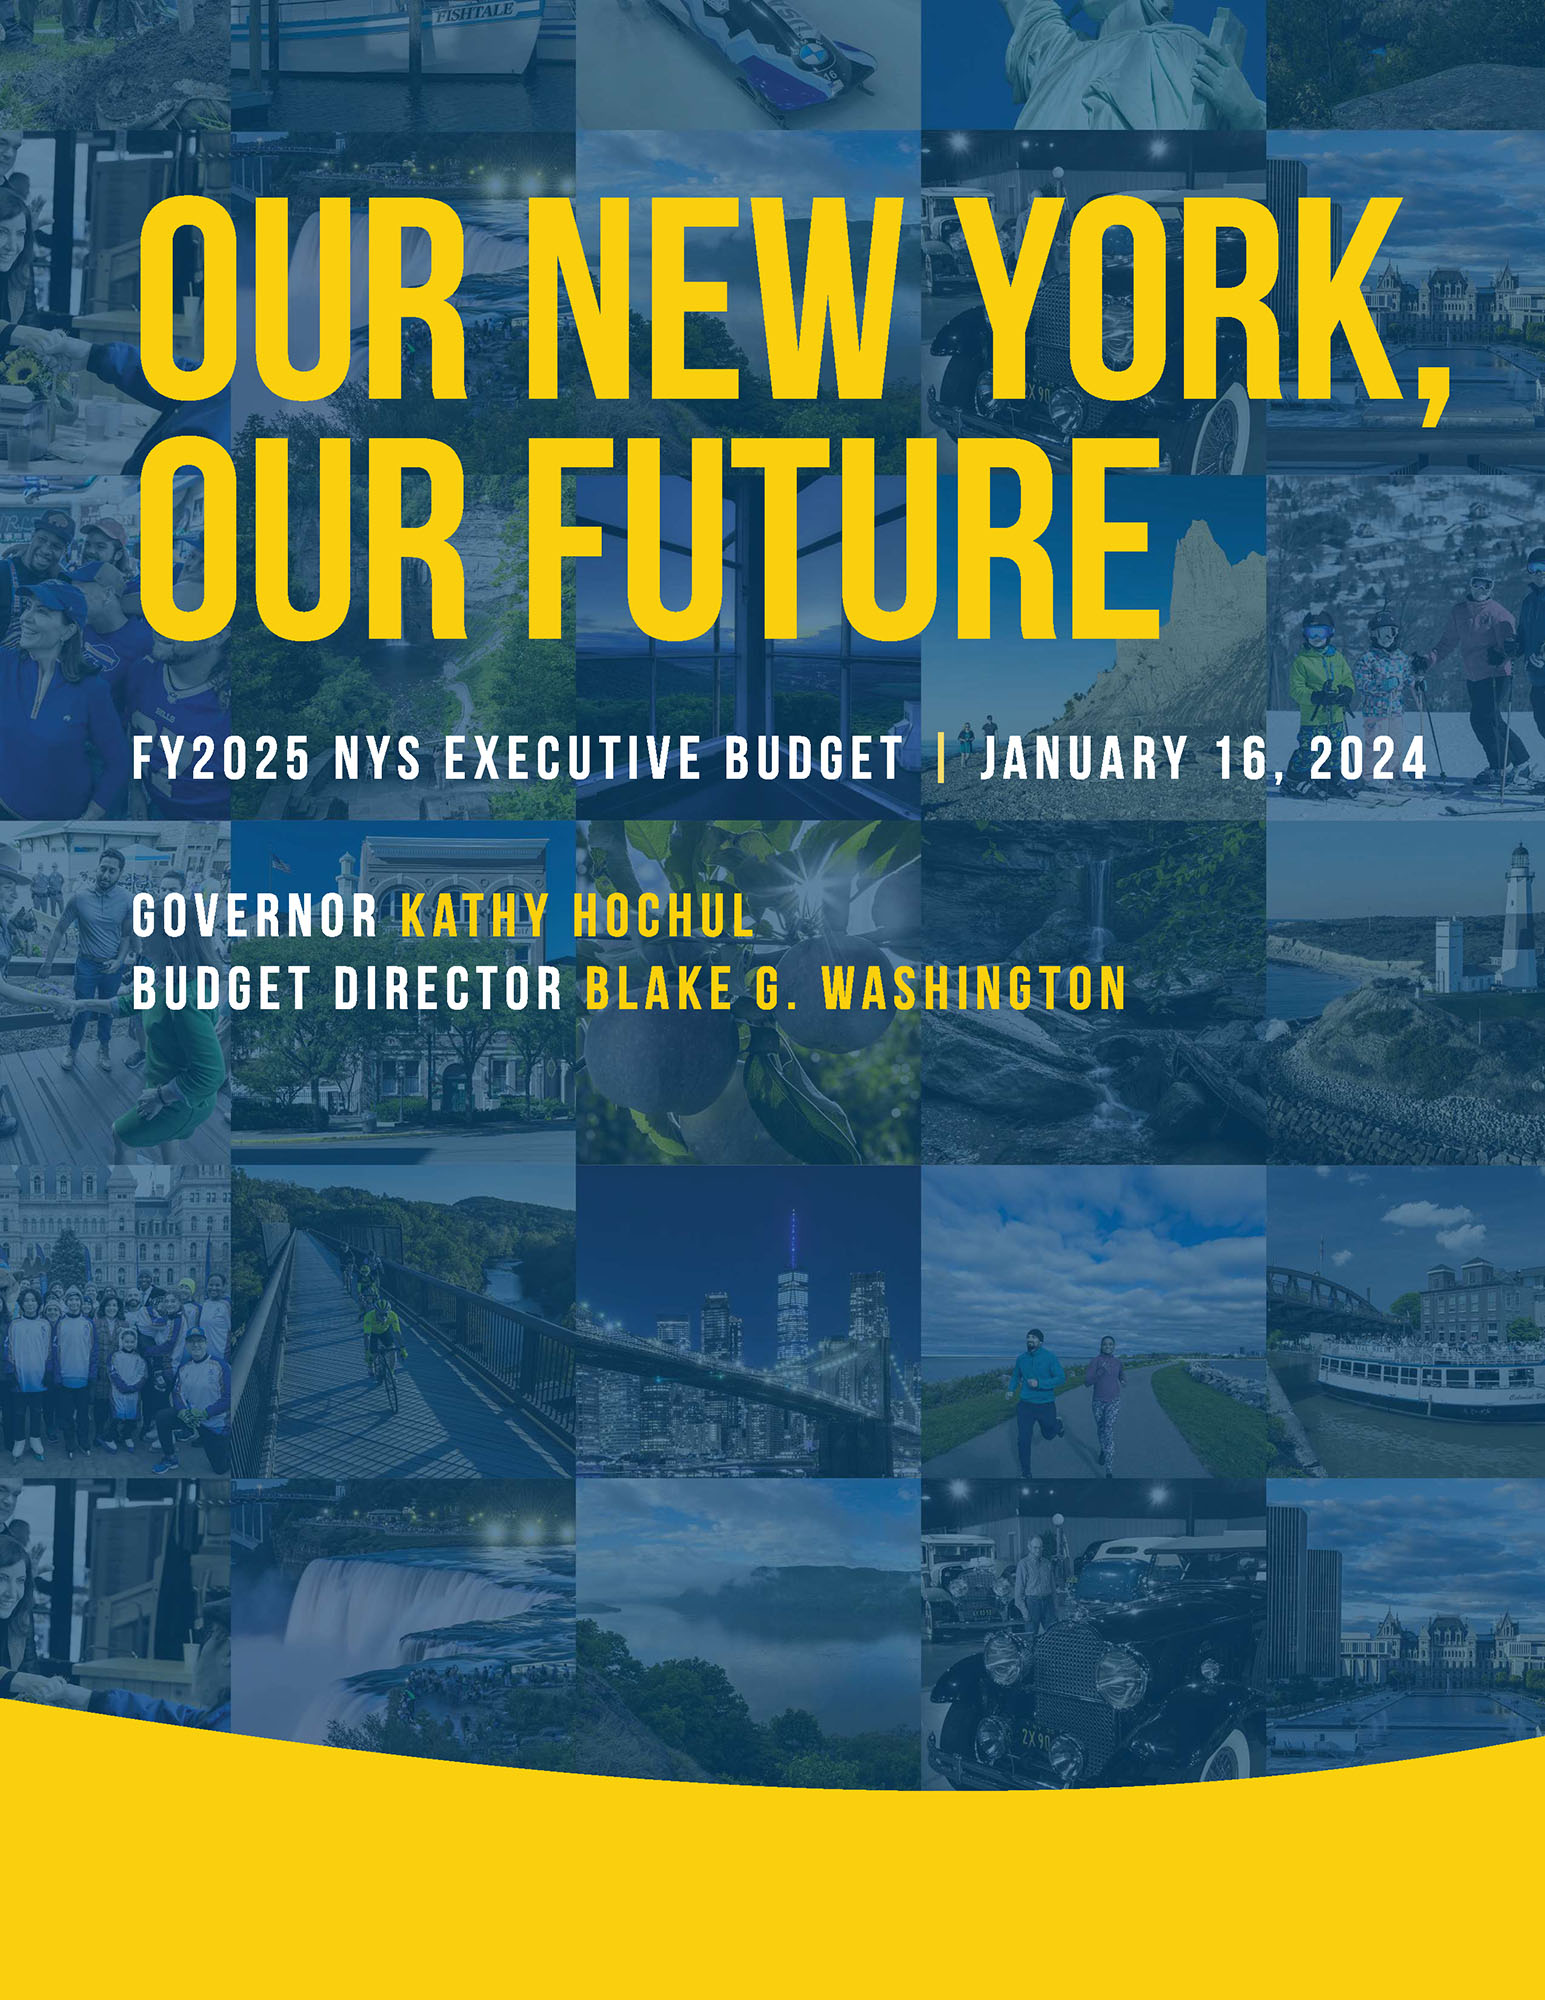 FY 2025 Briefing Book Cover